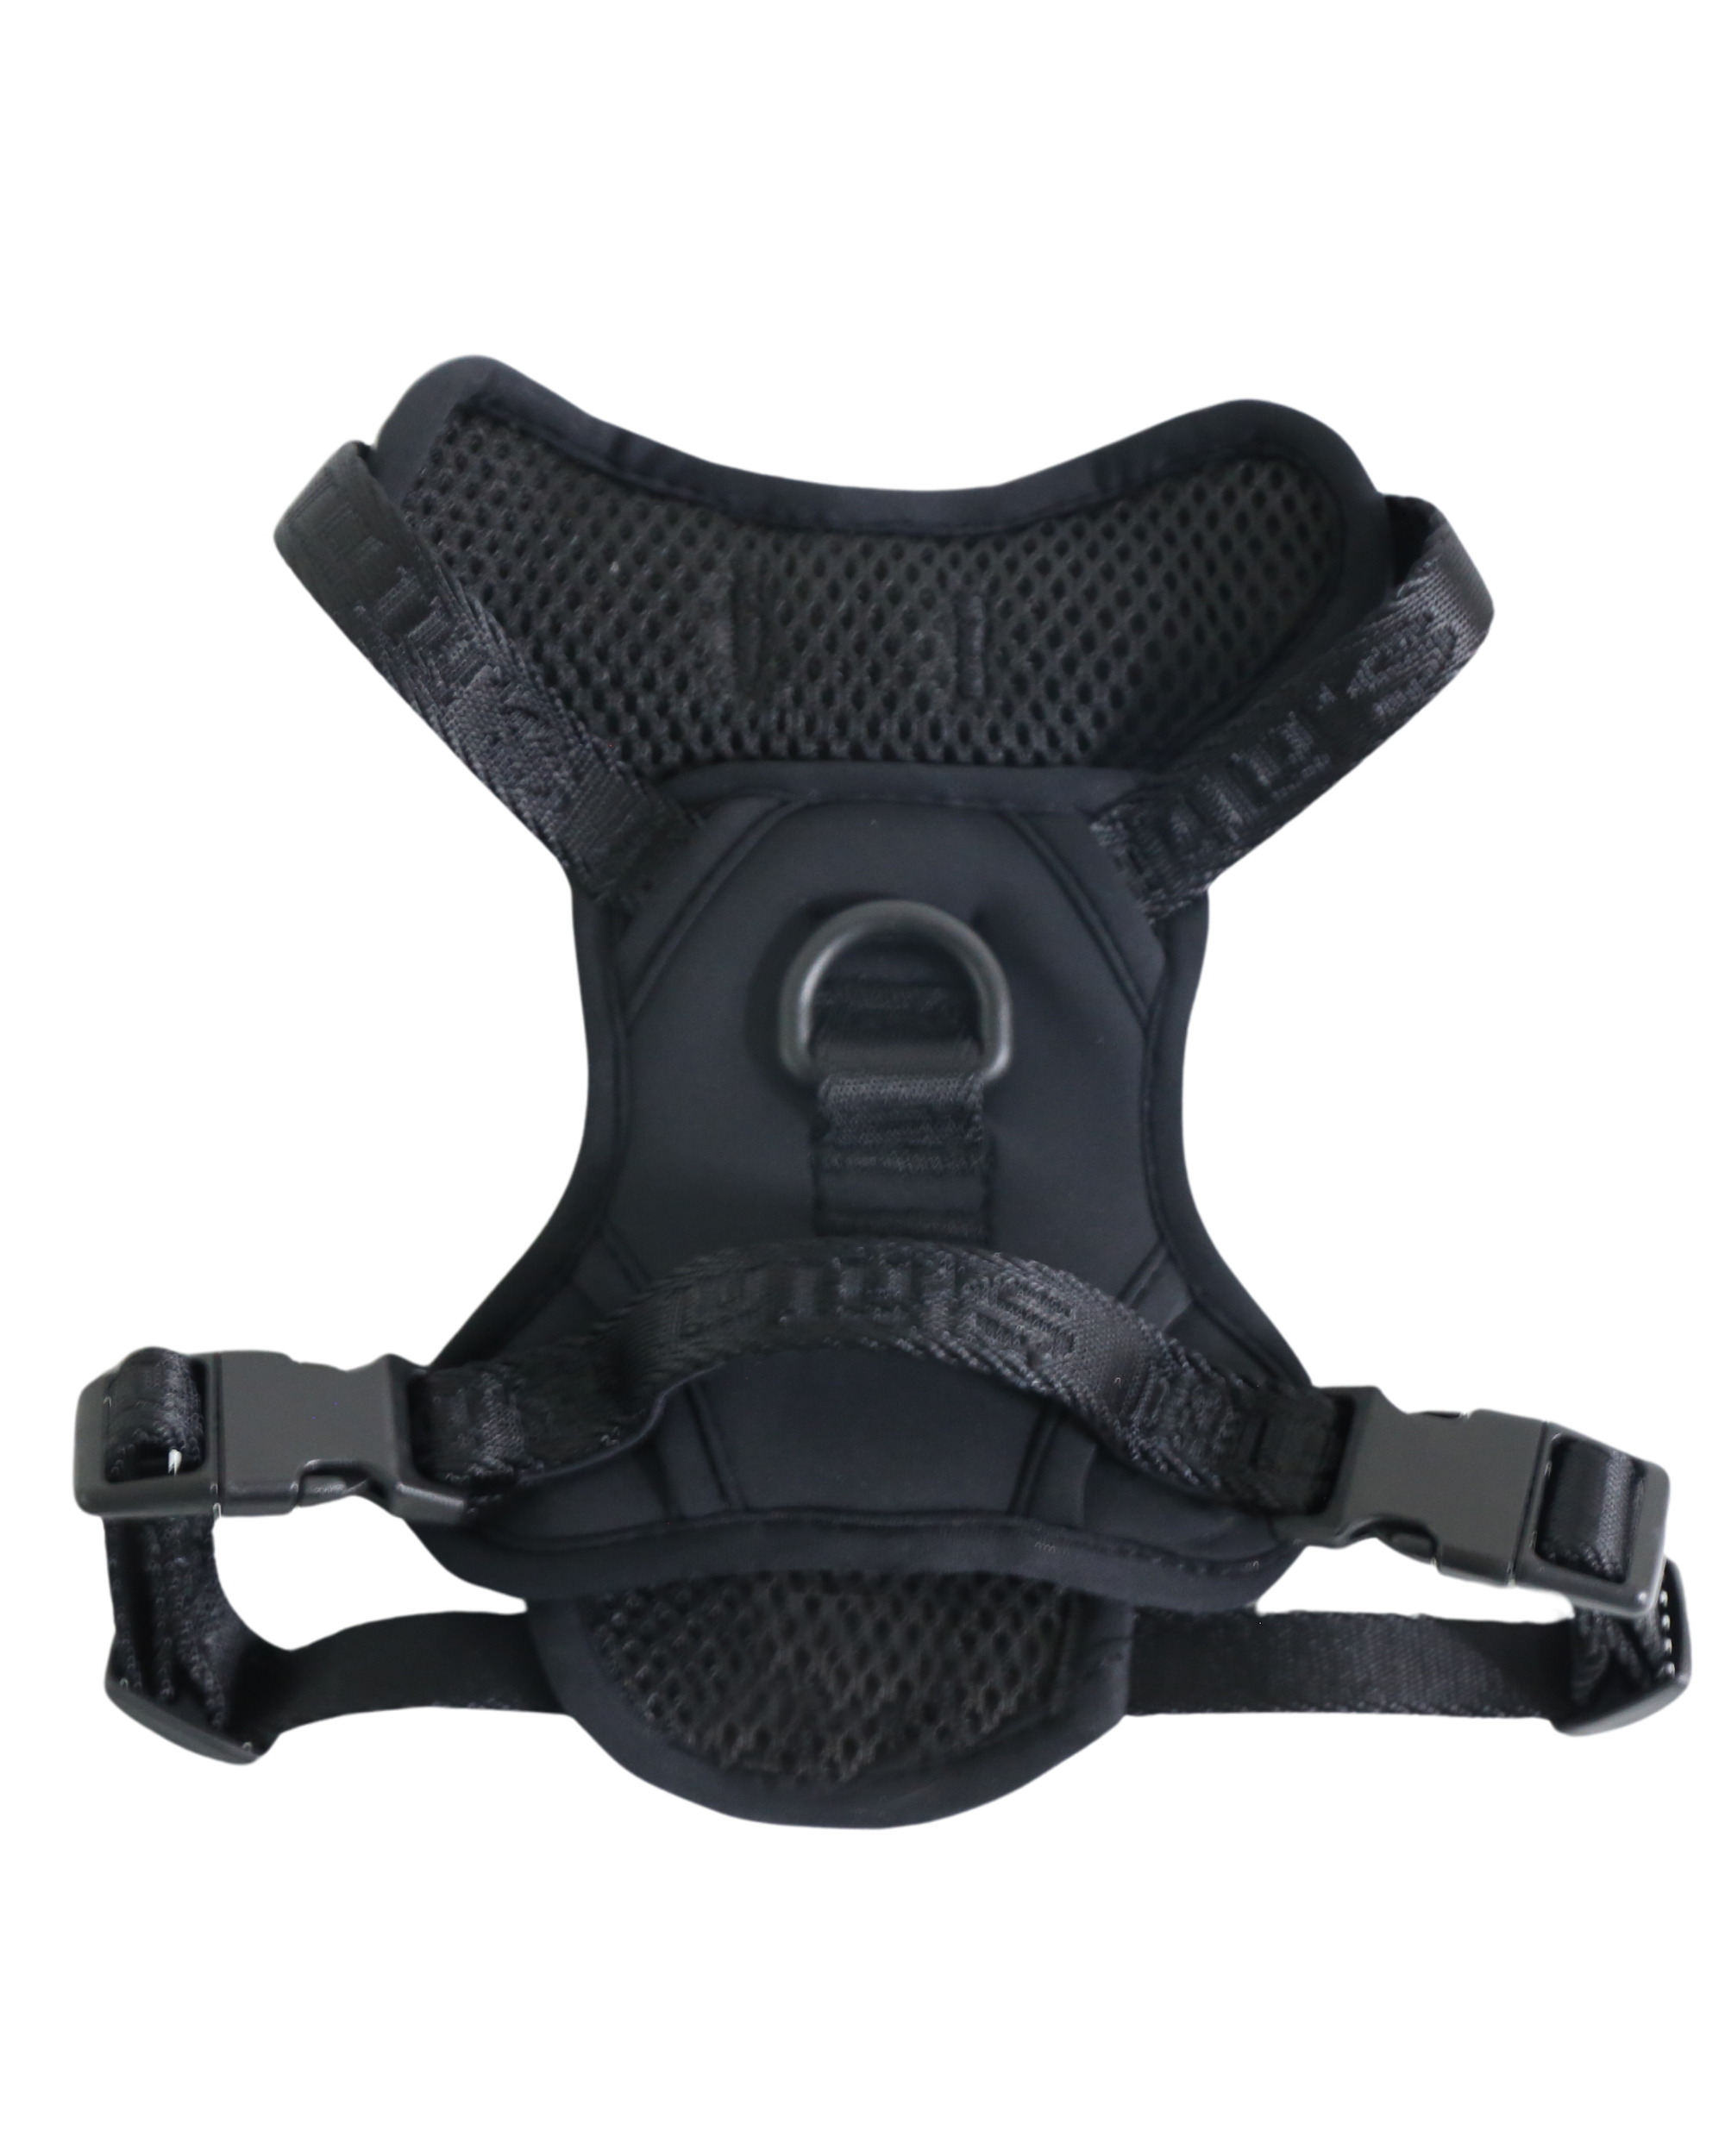 Lulu's Ultimate Dog Walking Harness in Midnight black, displayed against a white background.